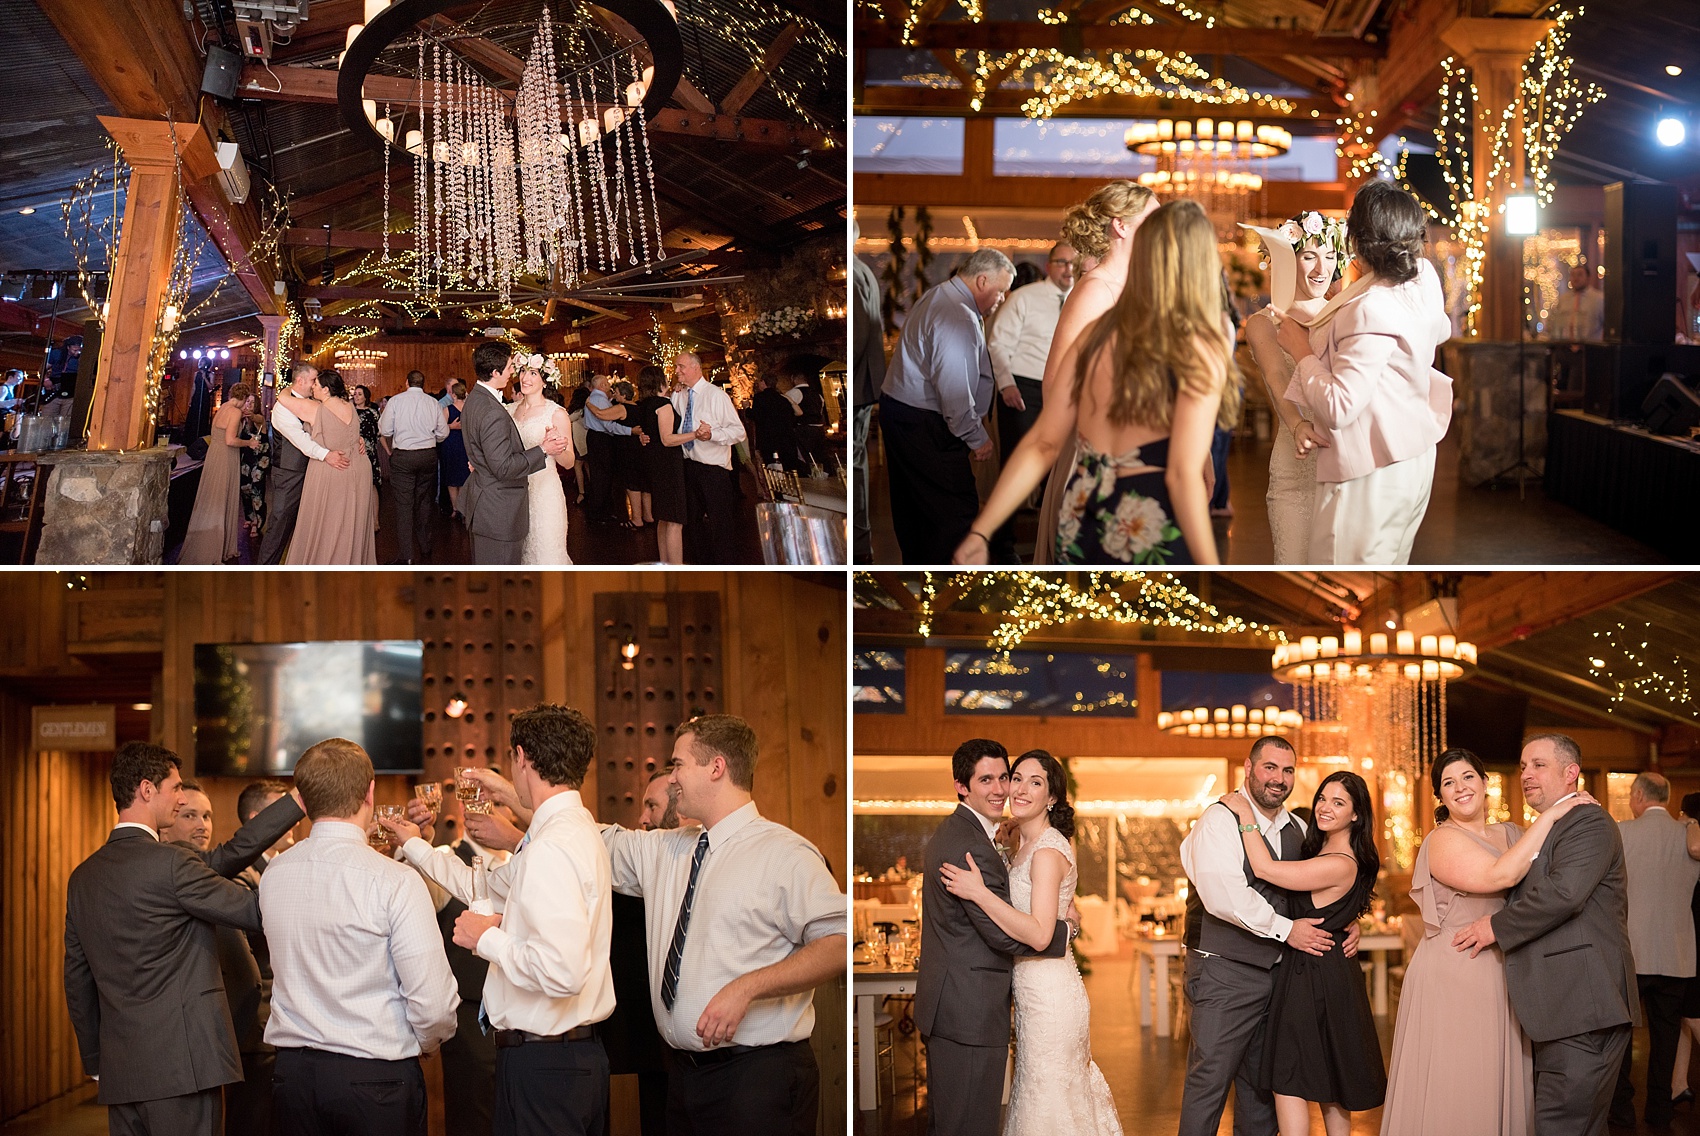 Pavilion at Angus Barn wedding photos by Mikkel Paige Photography. Picture of the guests dancing at the reception.